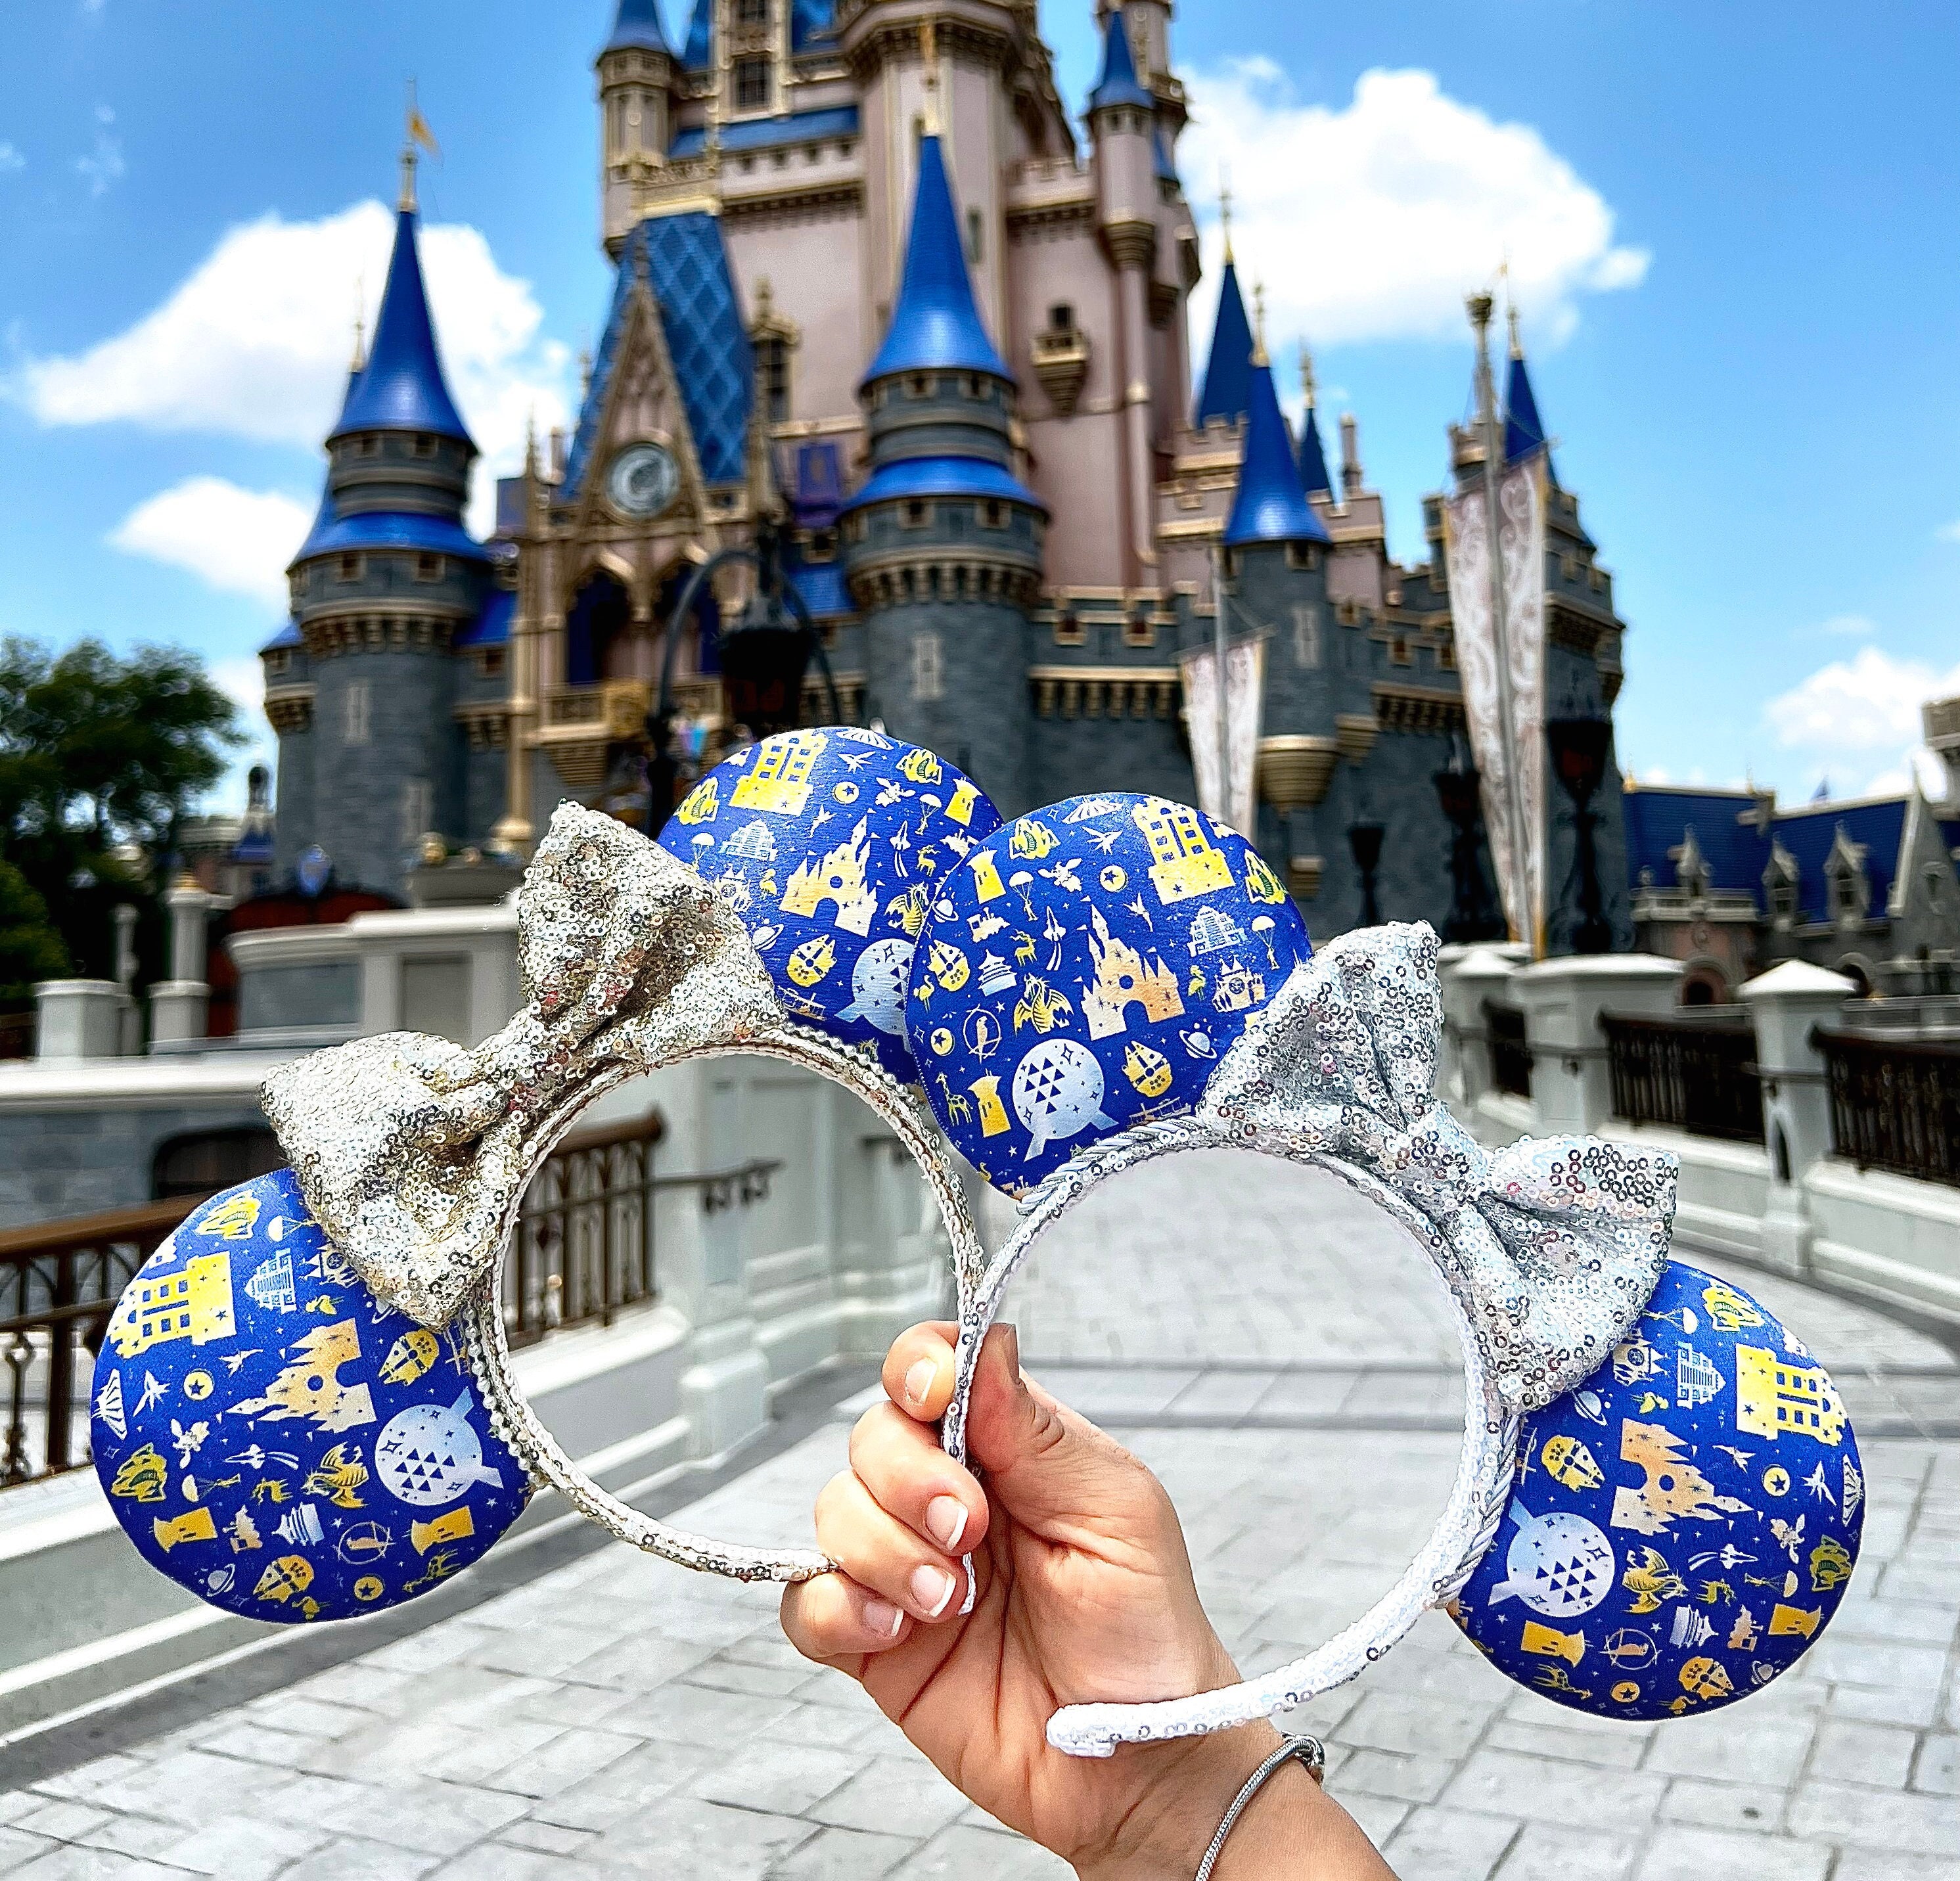 Disney-Parks WDW Annual Passholder Blue Sequined Minnie Mouse Bow Ears 2023